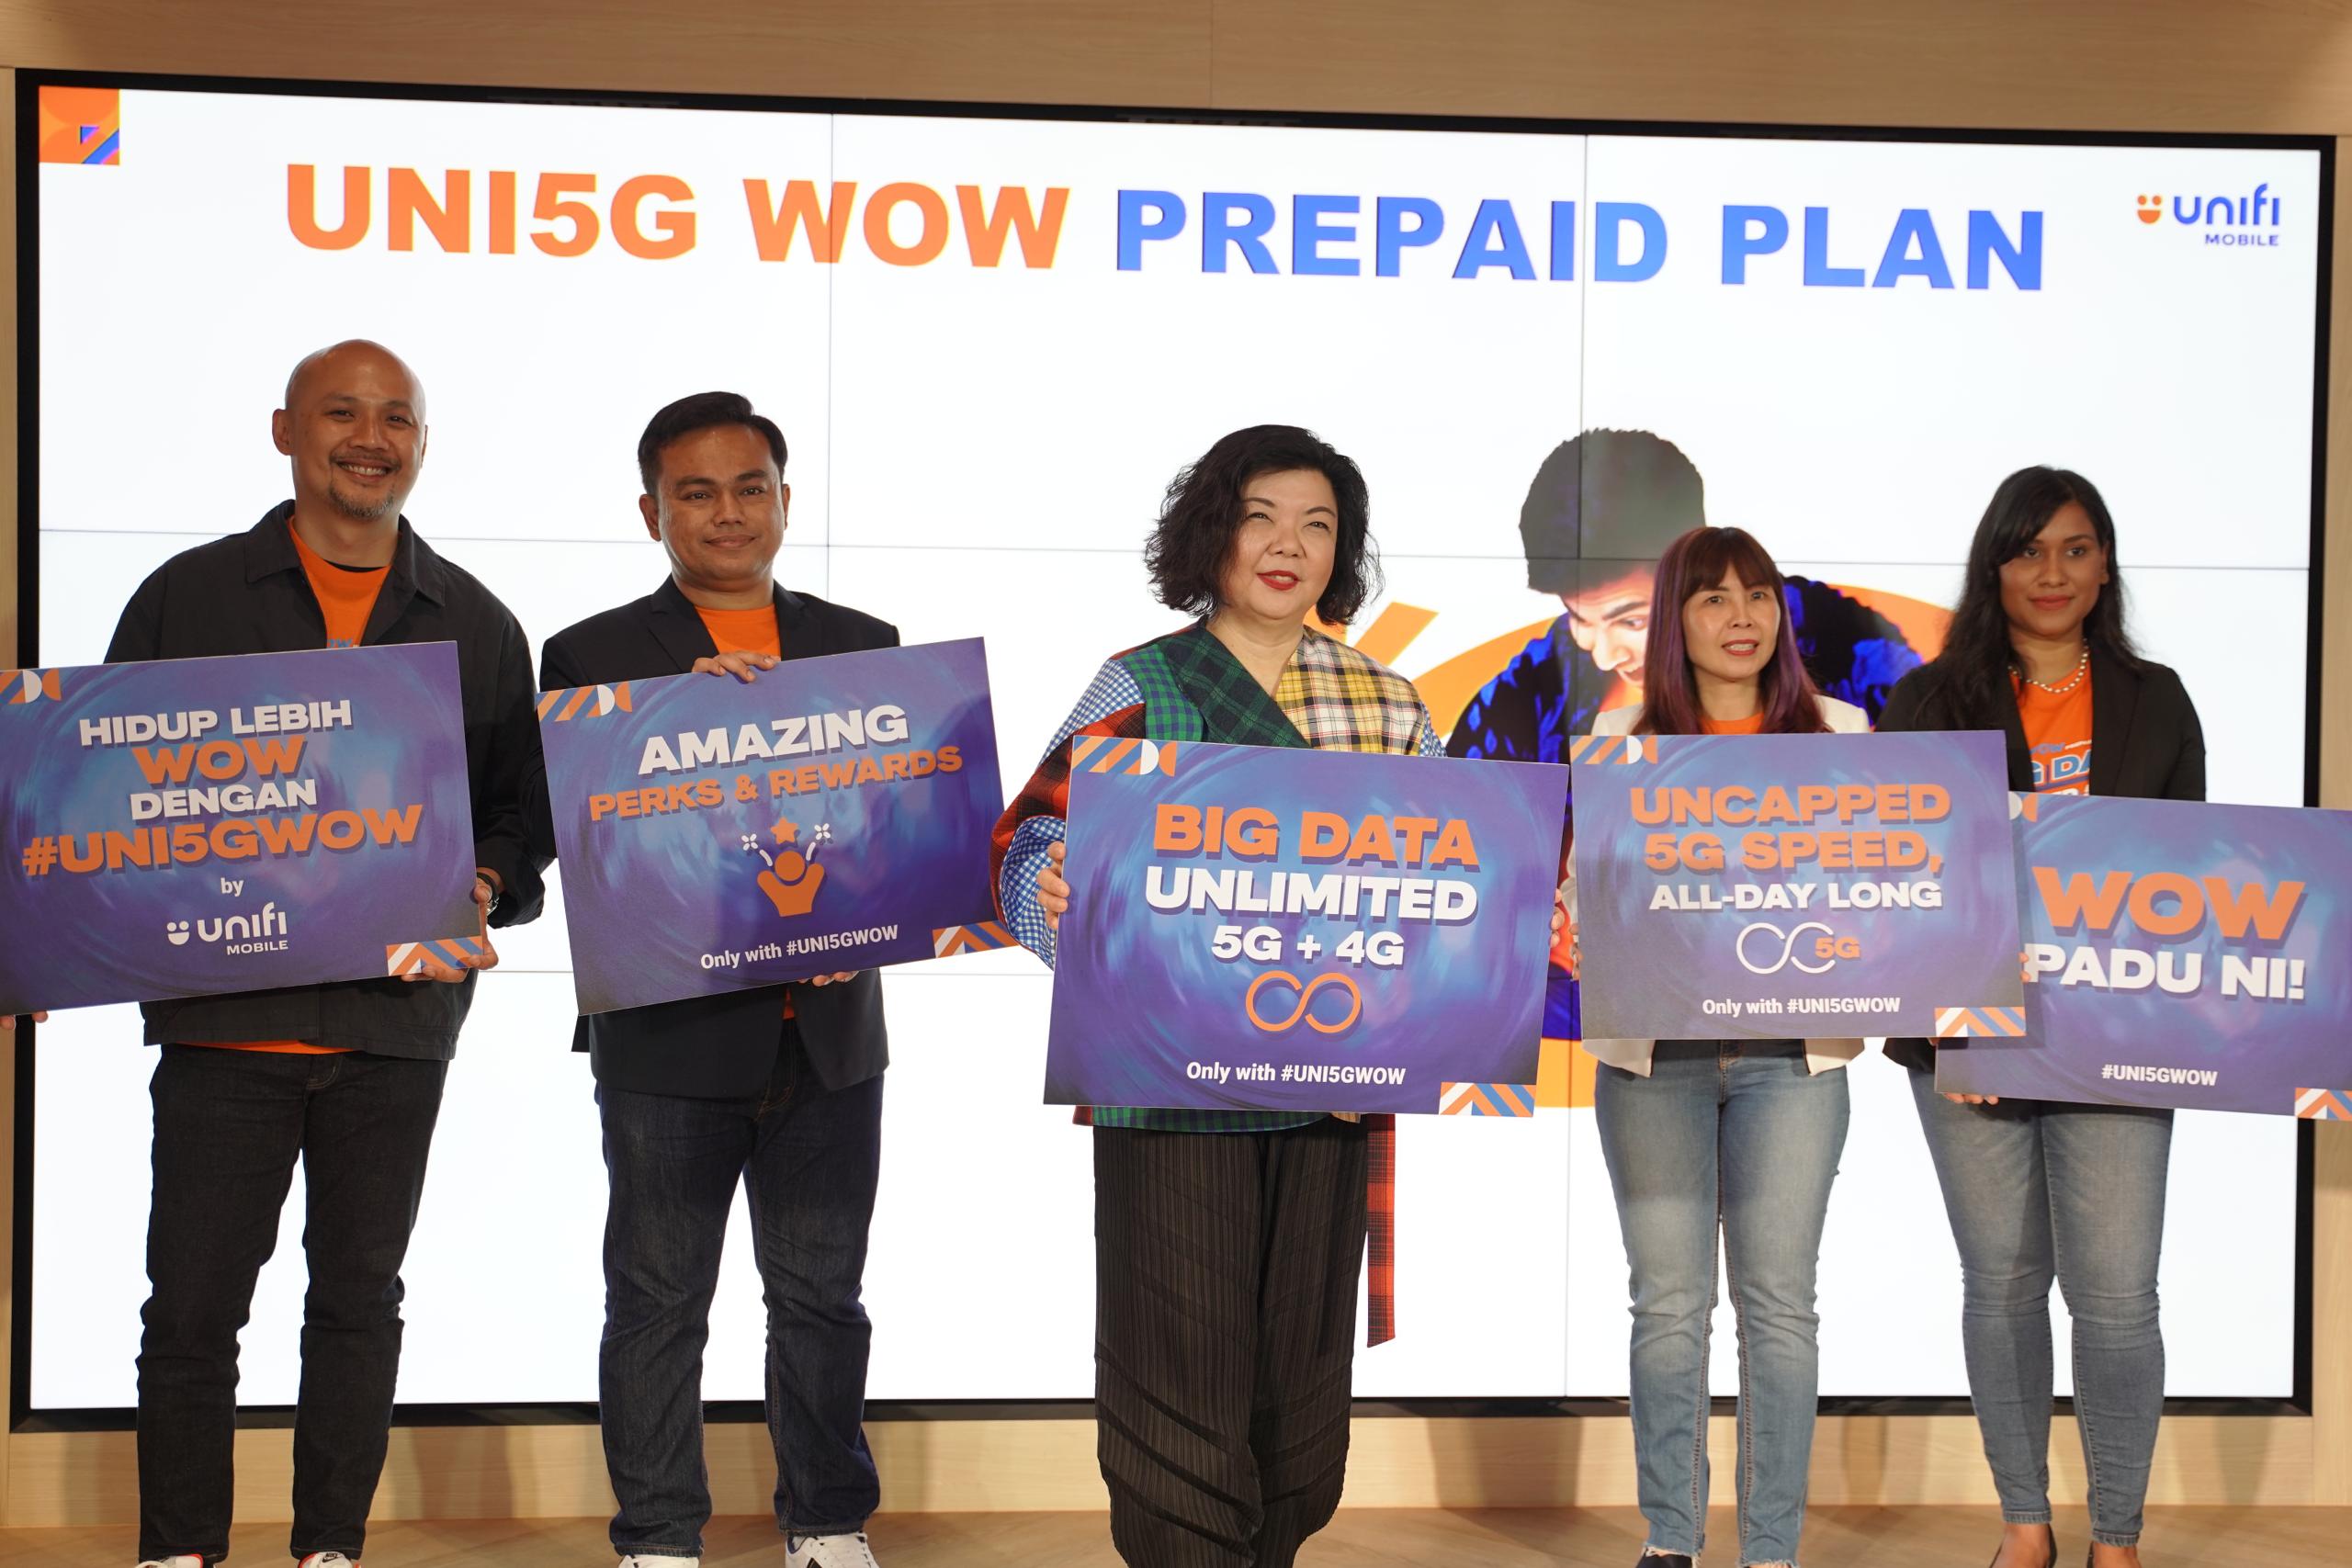 UNIFI REDEFINES MOBILE PREPAID EXPERIENCE WITH ALL-NEW UNI5G WOW PLANS